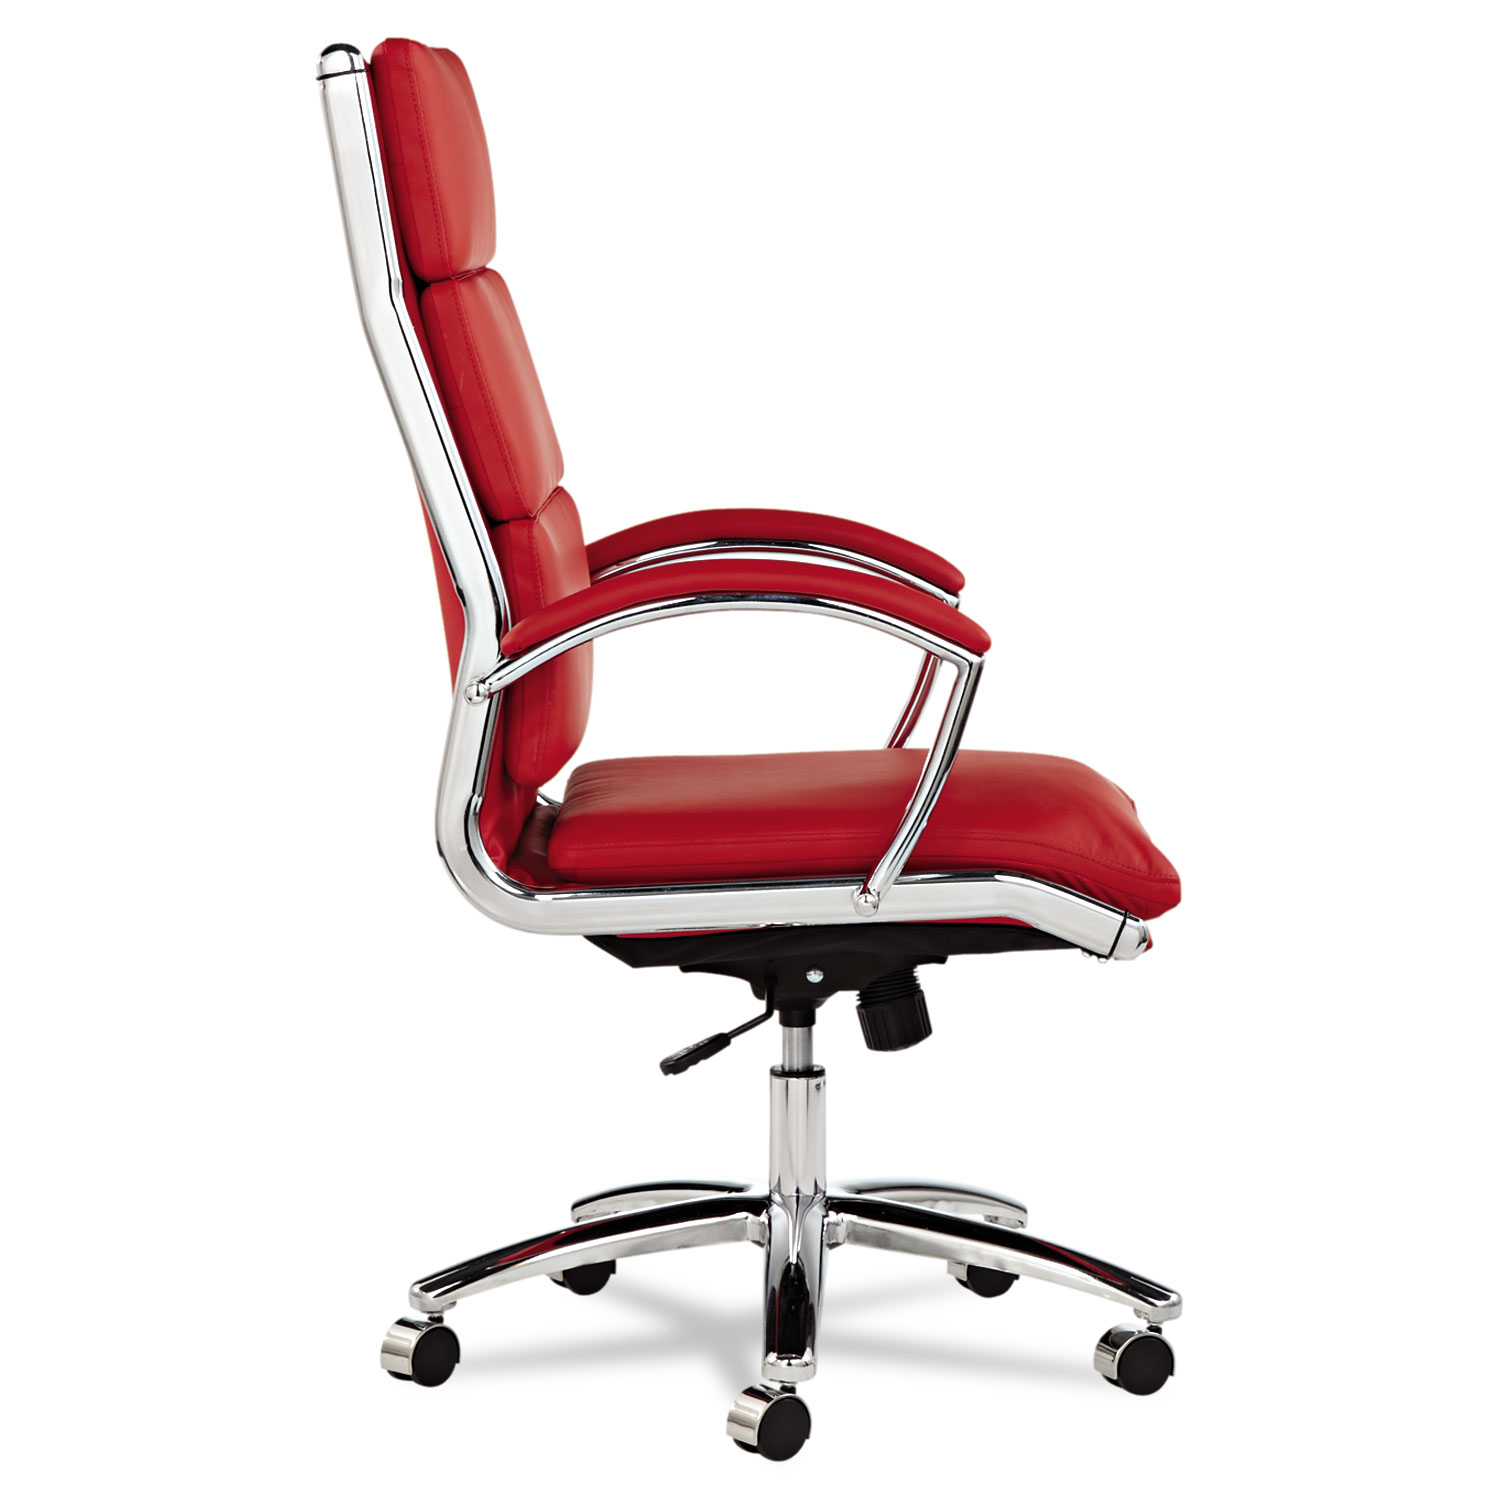 Alera Neratoli High-Back Slim Profile Chair, Supports up to 275 lbs., Red Seat/Red Back, Chrome Base